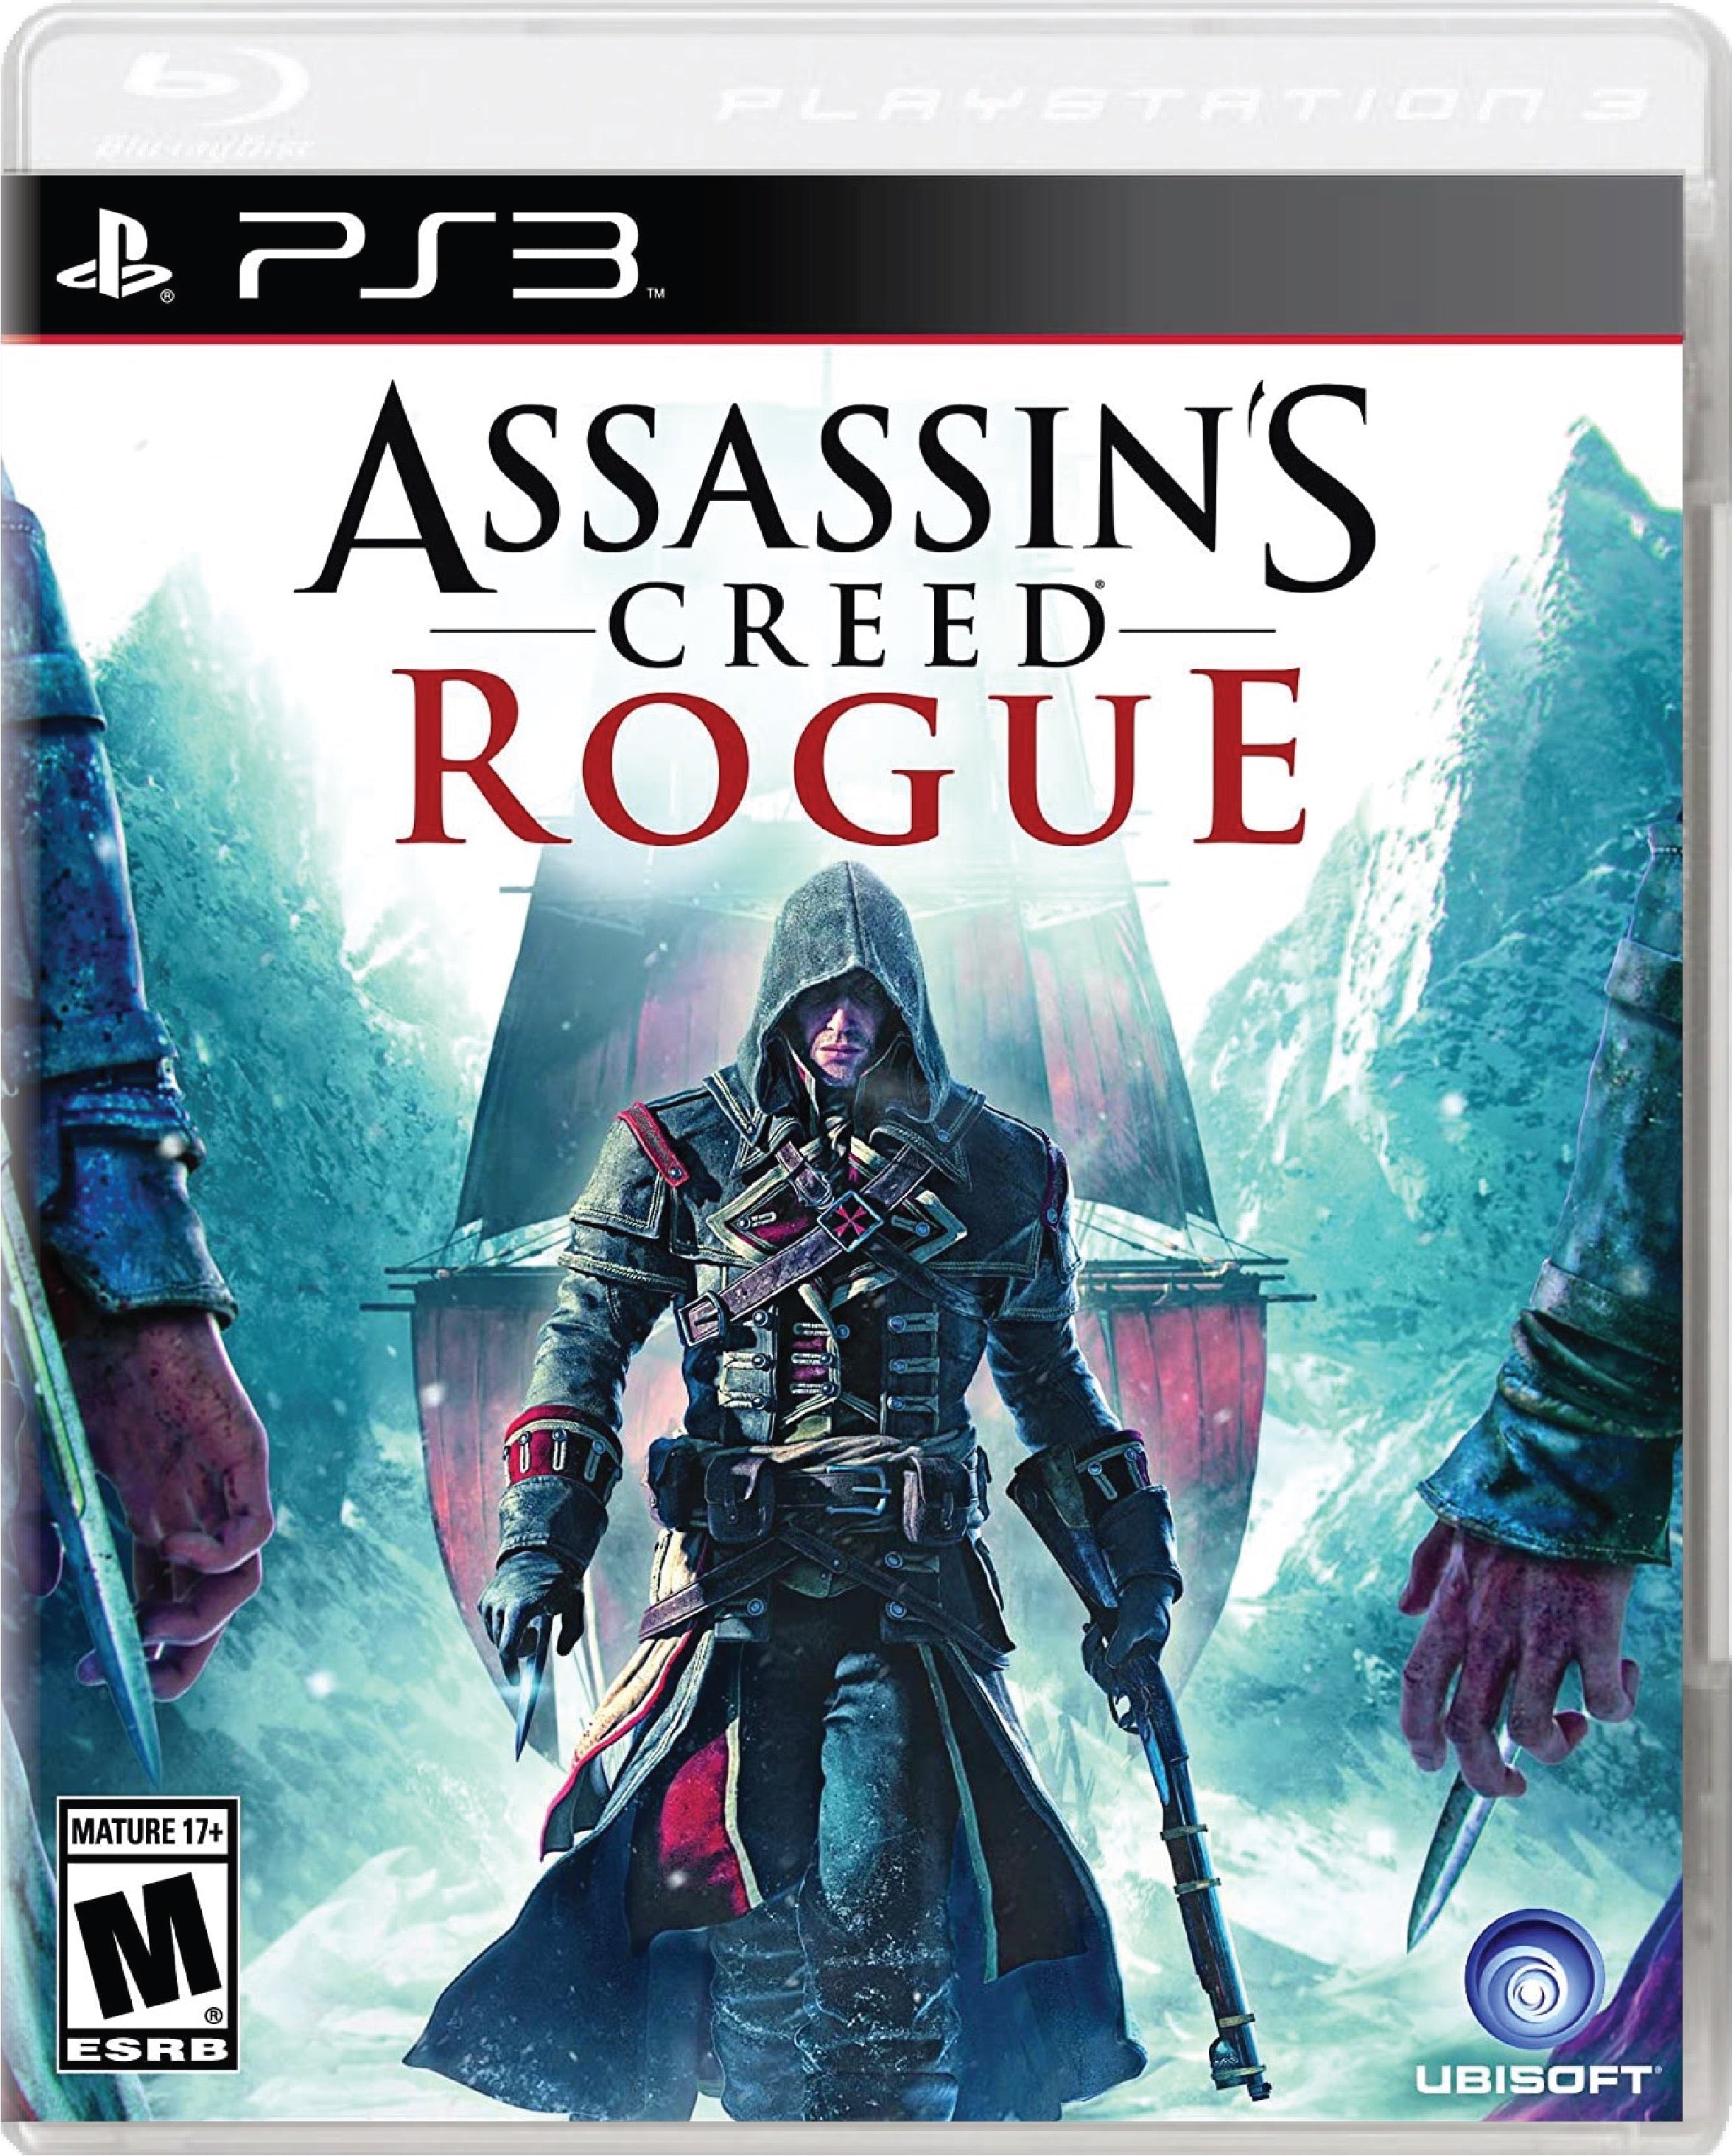 Assassin's Creed Rogue Cover Art